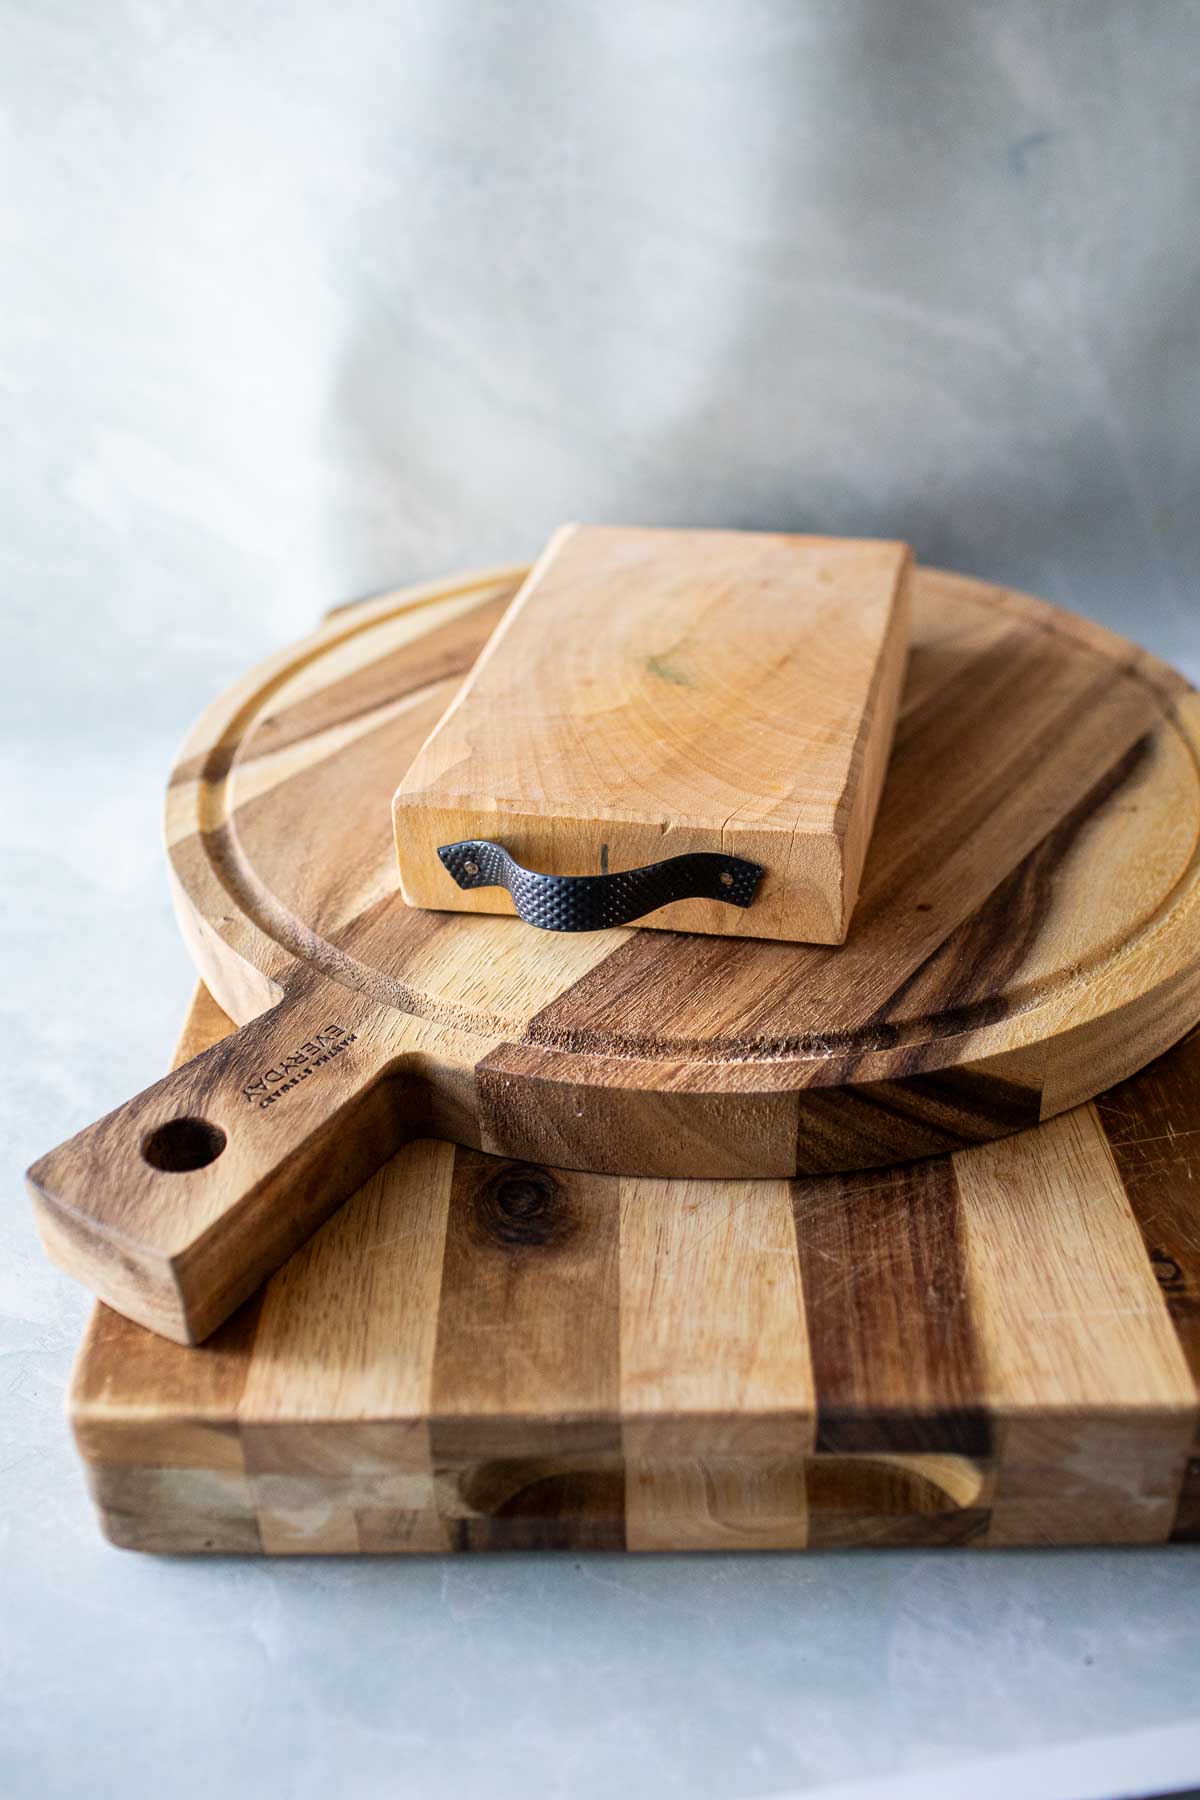 Thick cutting boards on the table.